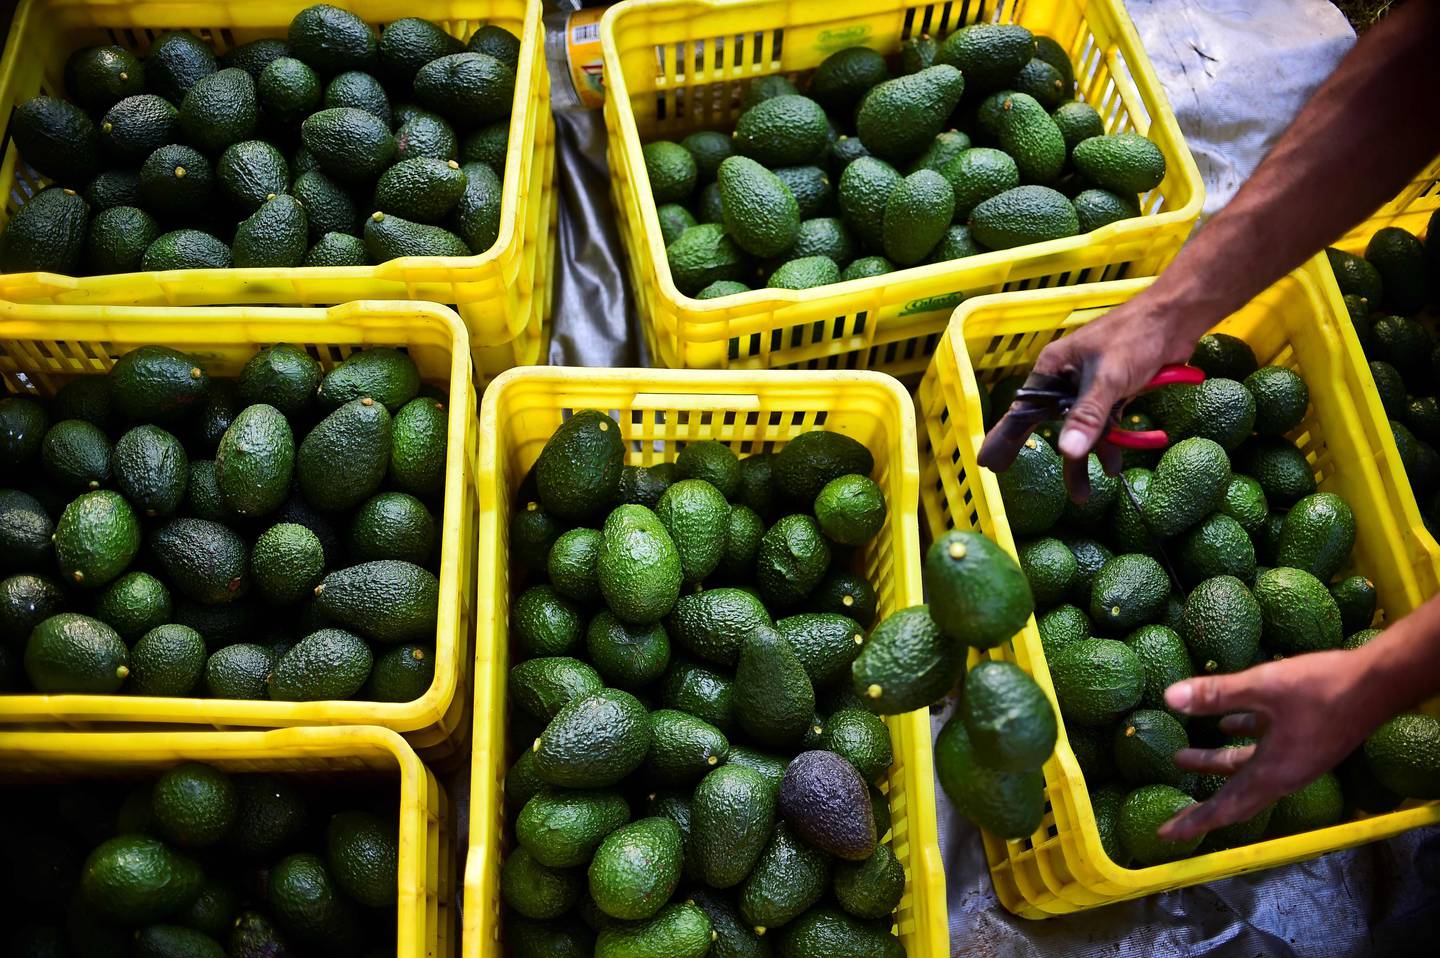 (FILES) In this file photo taken on October 19, 2016 a farmer harvests avocados at an orchard in the municipality of Uruapan, Michoacan State, Mexico. - Countless nutritional properties have made avocado a gastronomic star in the US and Europe, but the voracious demand for this fruit adds detractors due to the environmental impact caused by its exploitation in Latin American main producing countries, such as Mexico, Chile, Peru or Colombia. (Photo by Ronaldo SCHEMIDT / AFP)